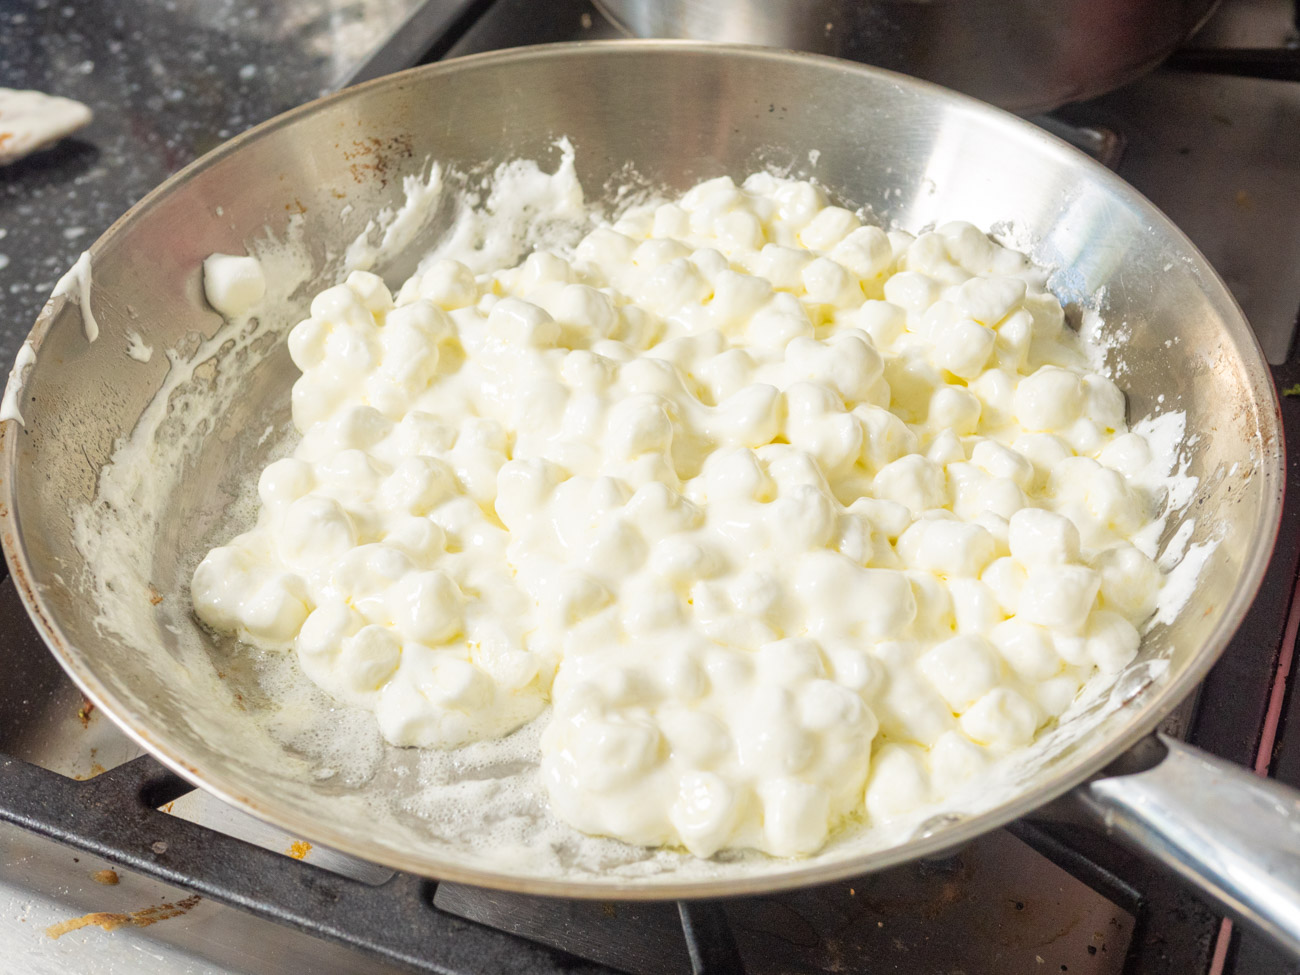 Melt the butter in a large pot over medium heat, then stir in the marshmallows until everything is smooth and melted.